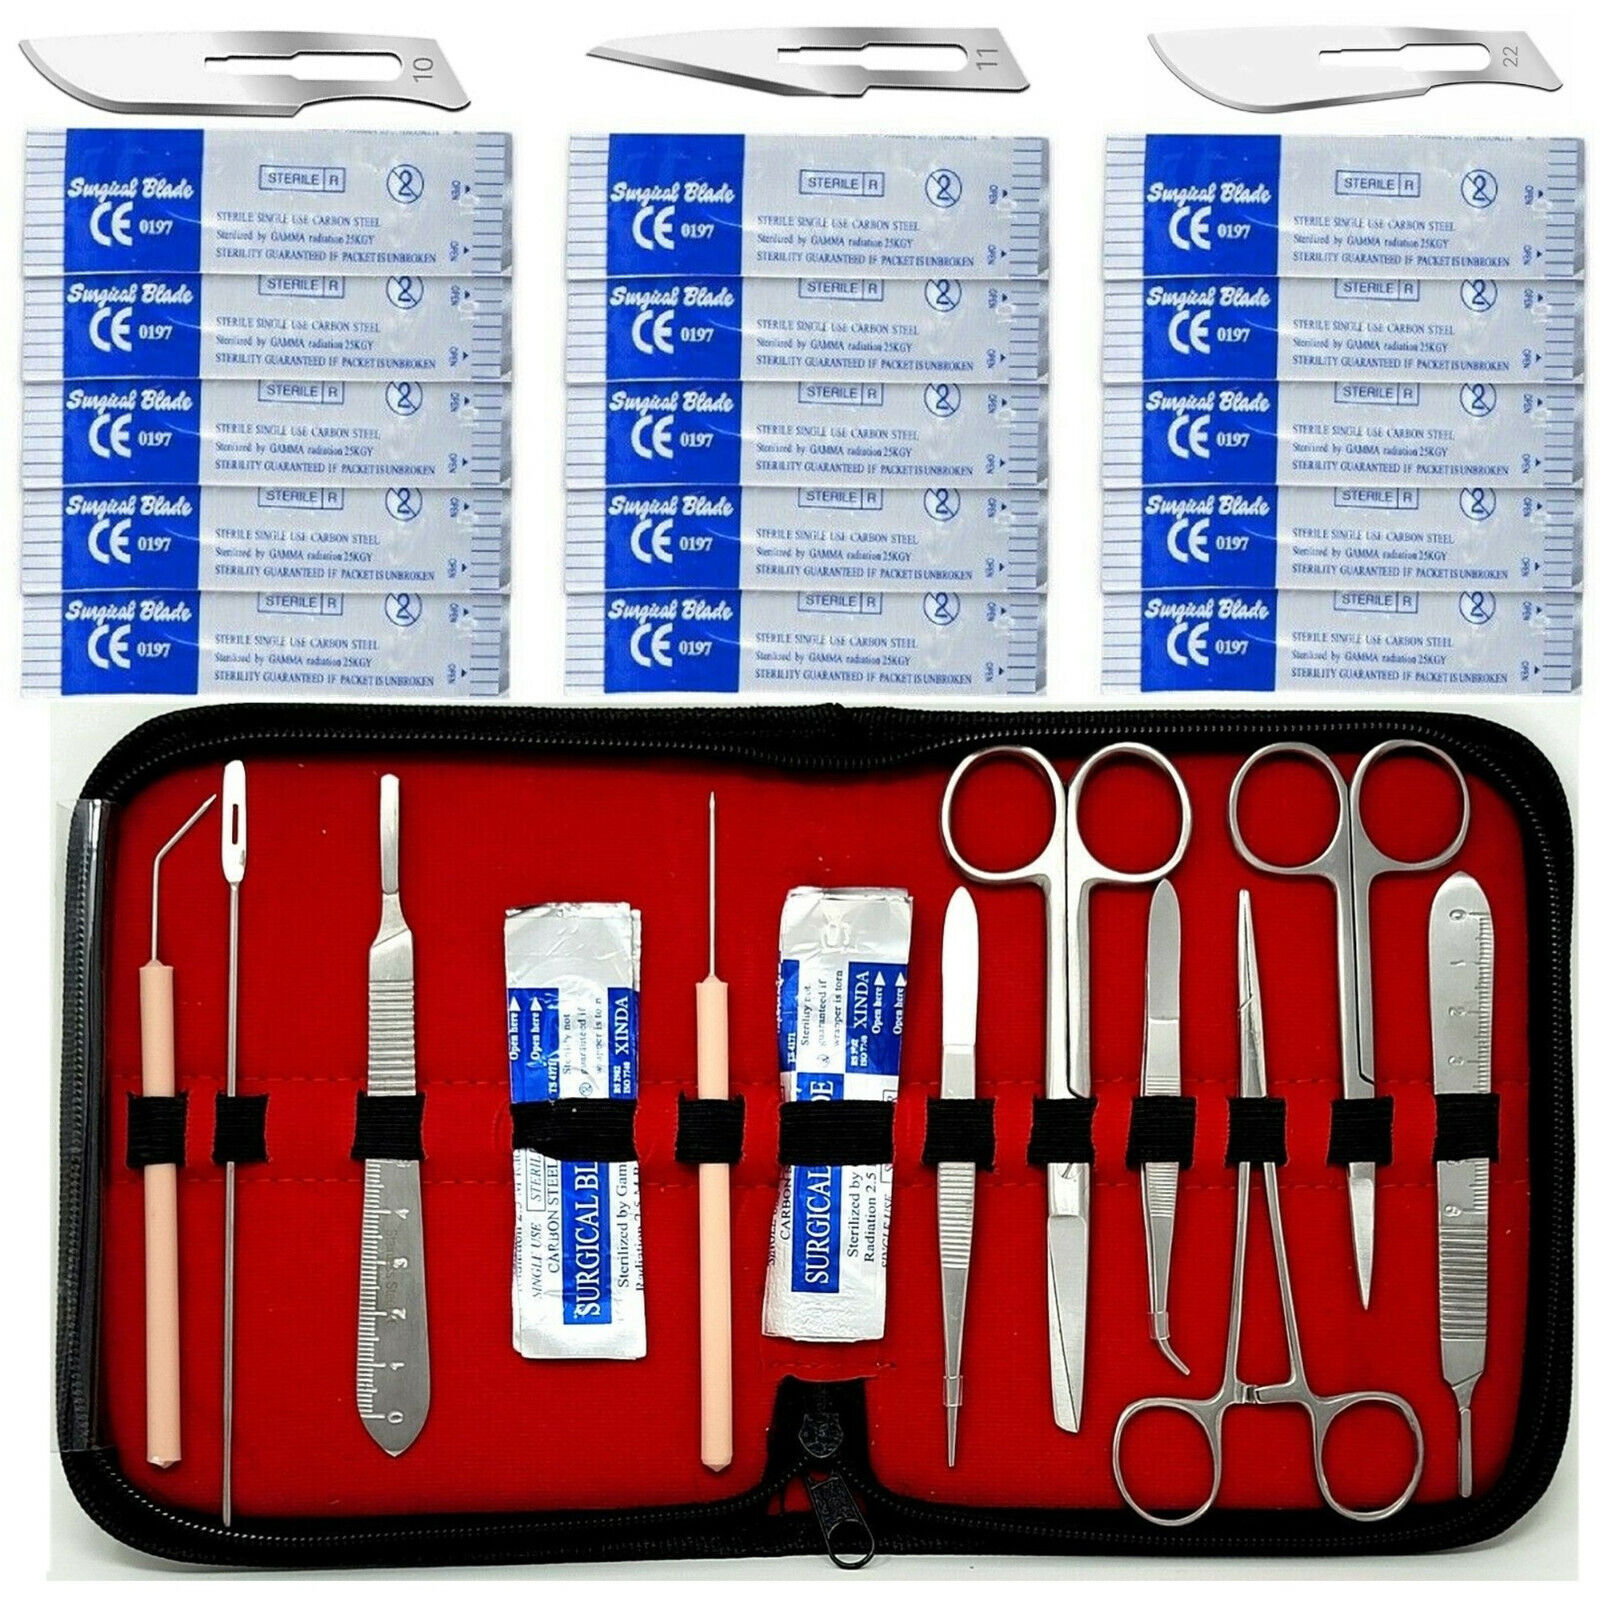 Surgical Suture Kit Basic First Aid Set Suture Emergency Trauma Survival Pack HTI Does Not Apply - фотография #3